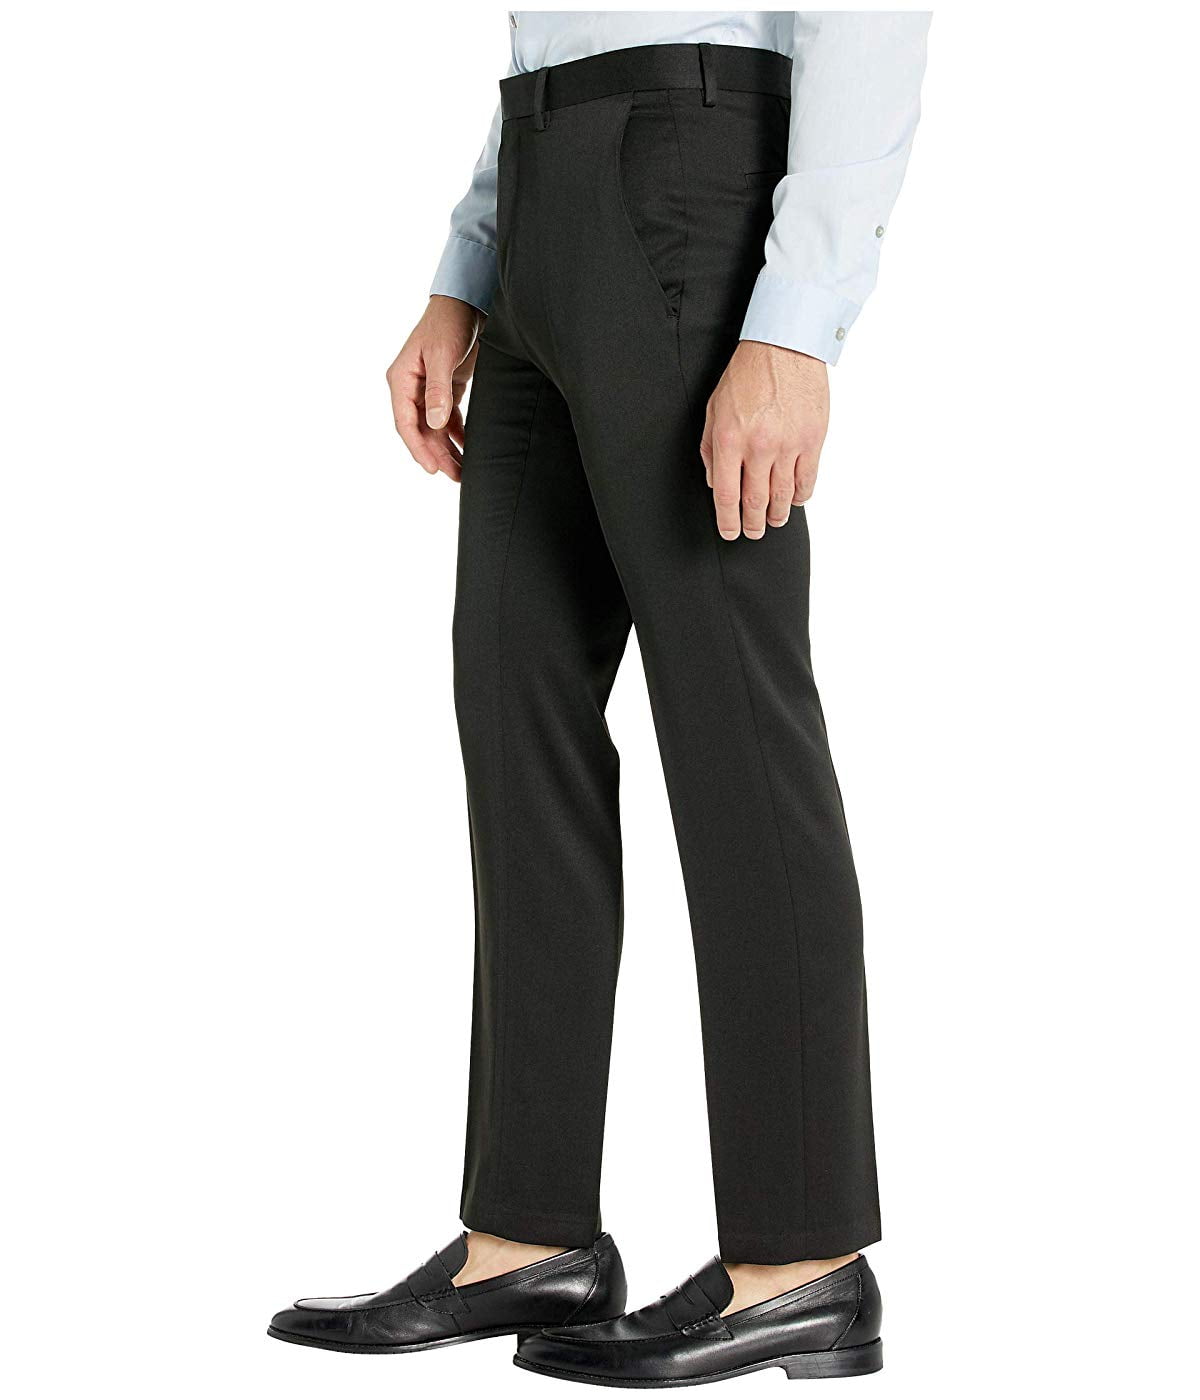 Kenneth Cole REACTION Mens Stretch Urban Heather Slim Fit Flat Front Dress Pant 